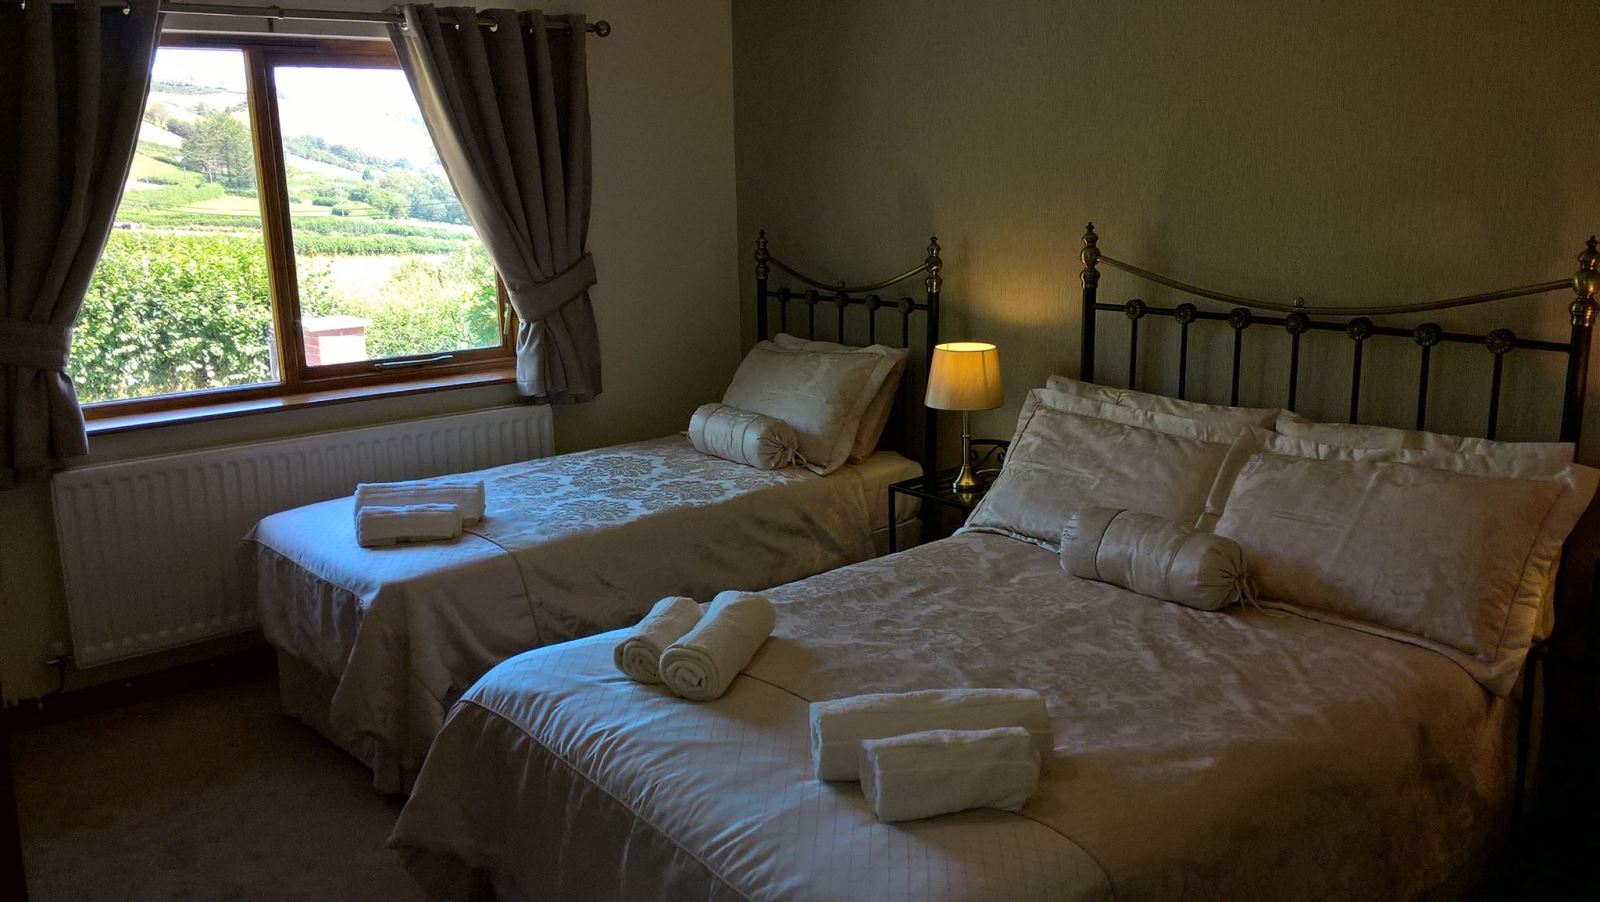 Family Accommodation Salf Catering Llanidloes